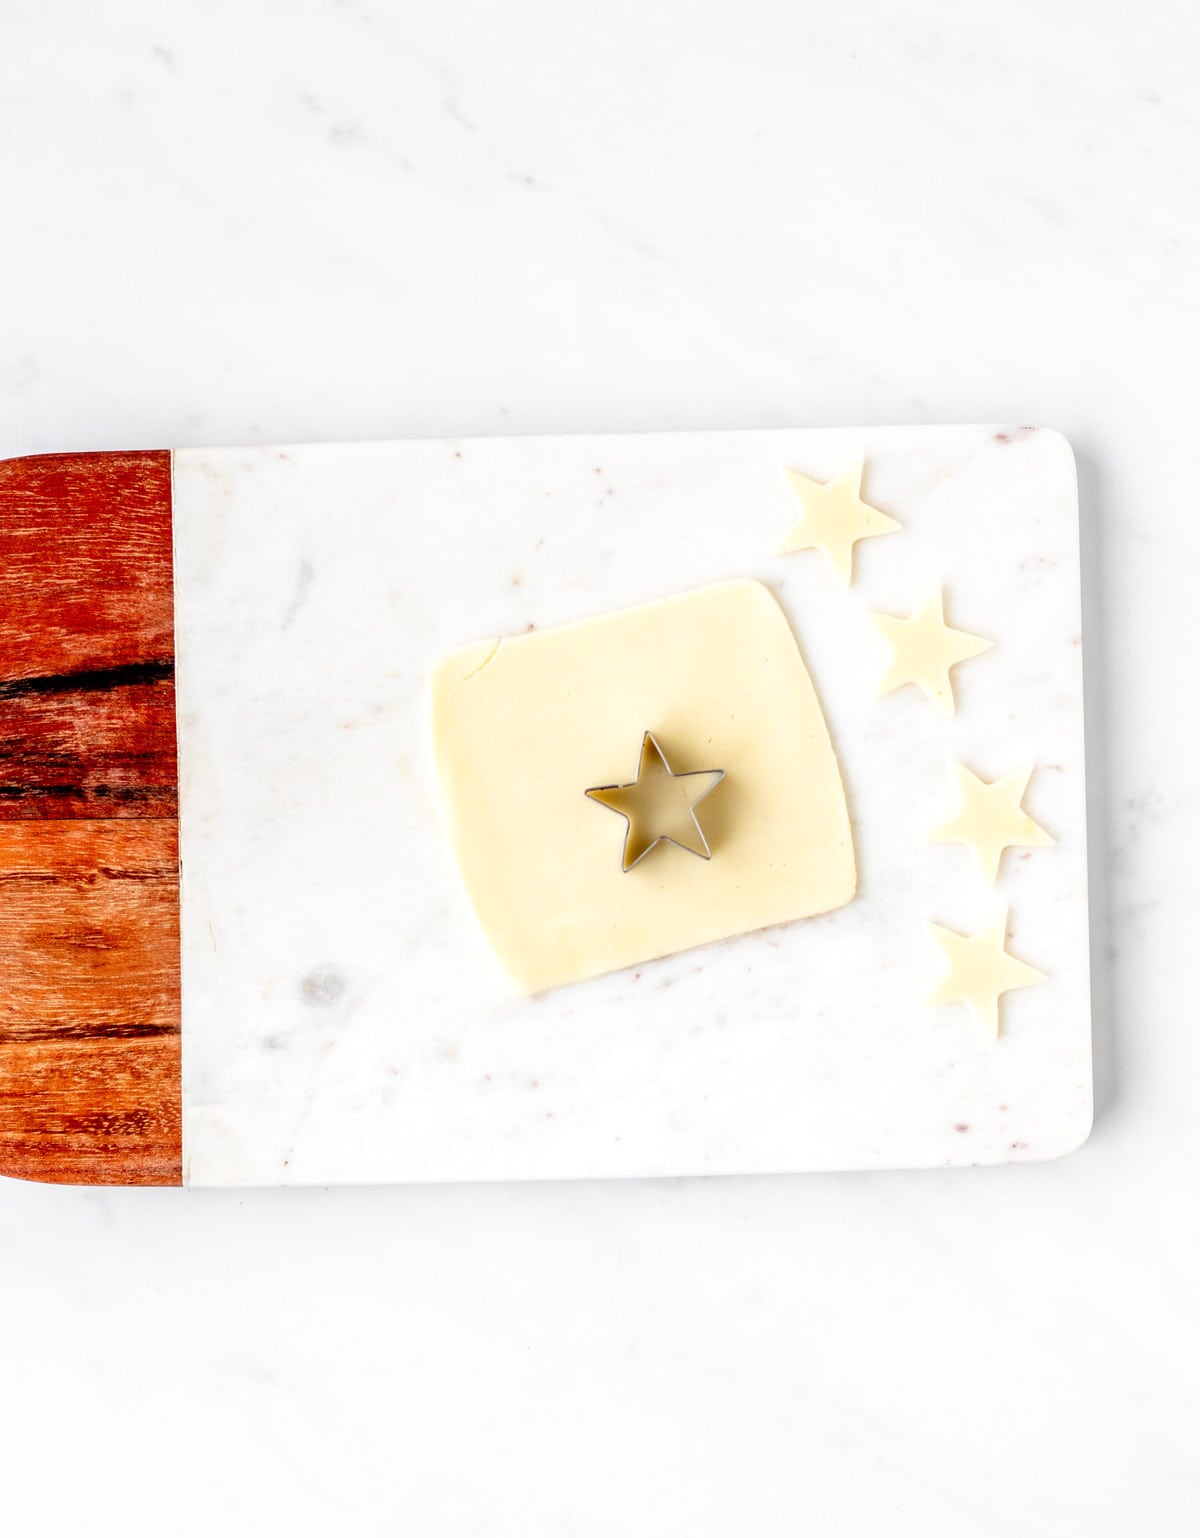 Making mini stars out of a piece of cheese using the mini star cutter, on a cutting board.